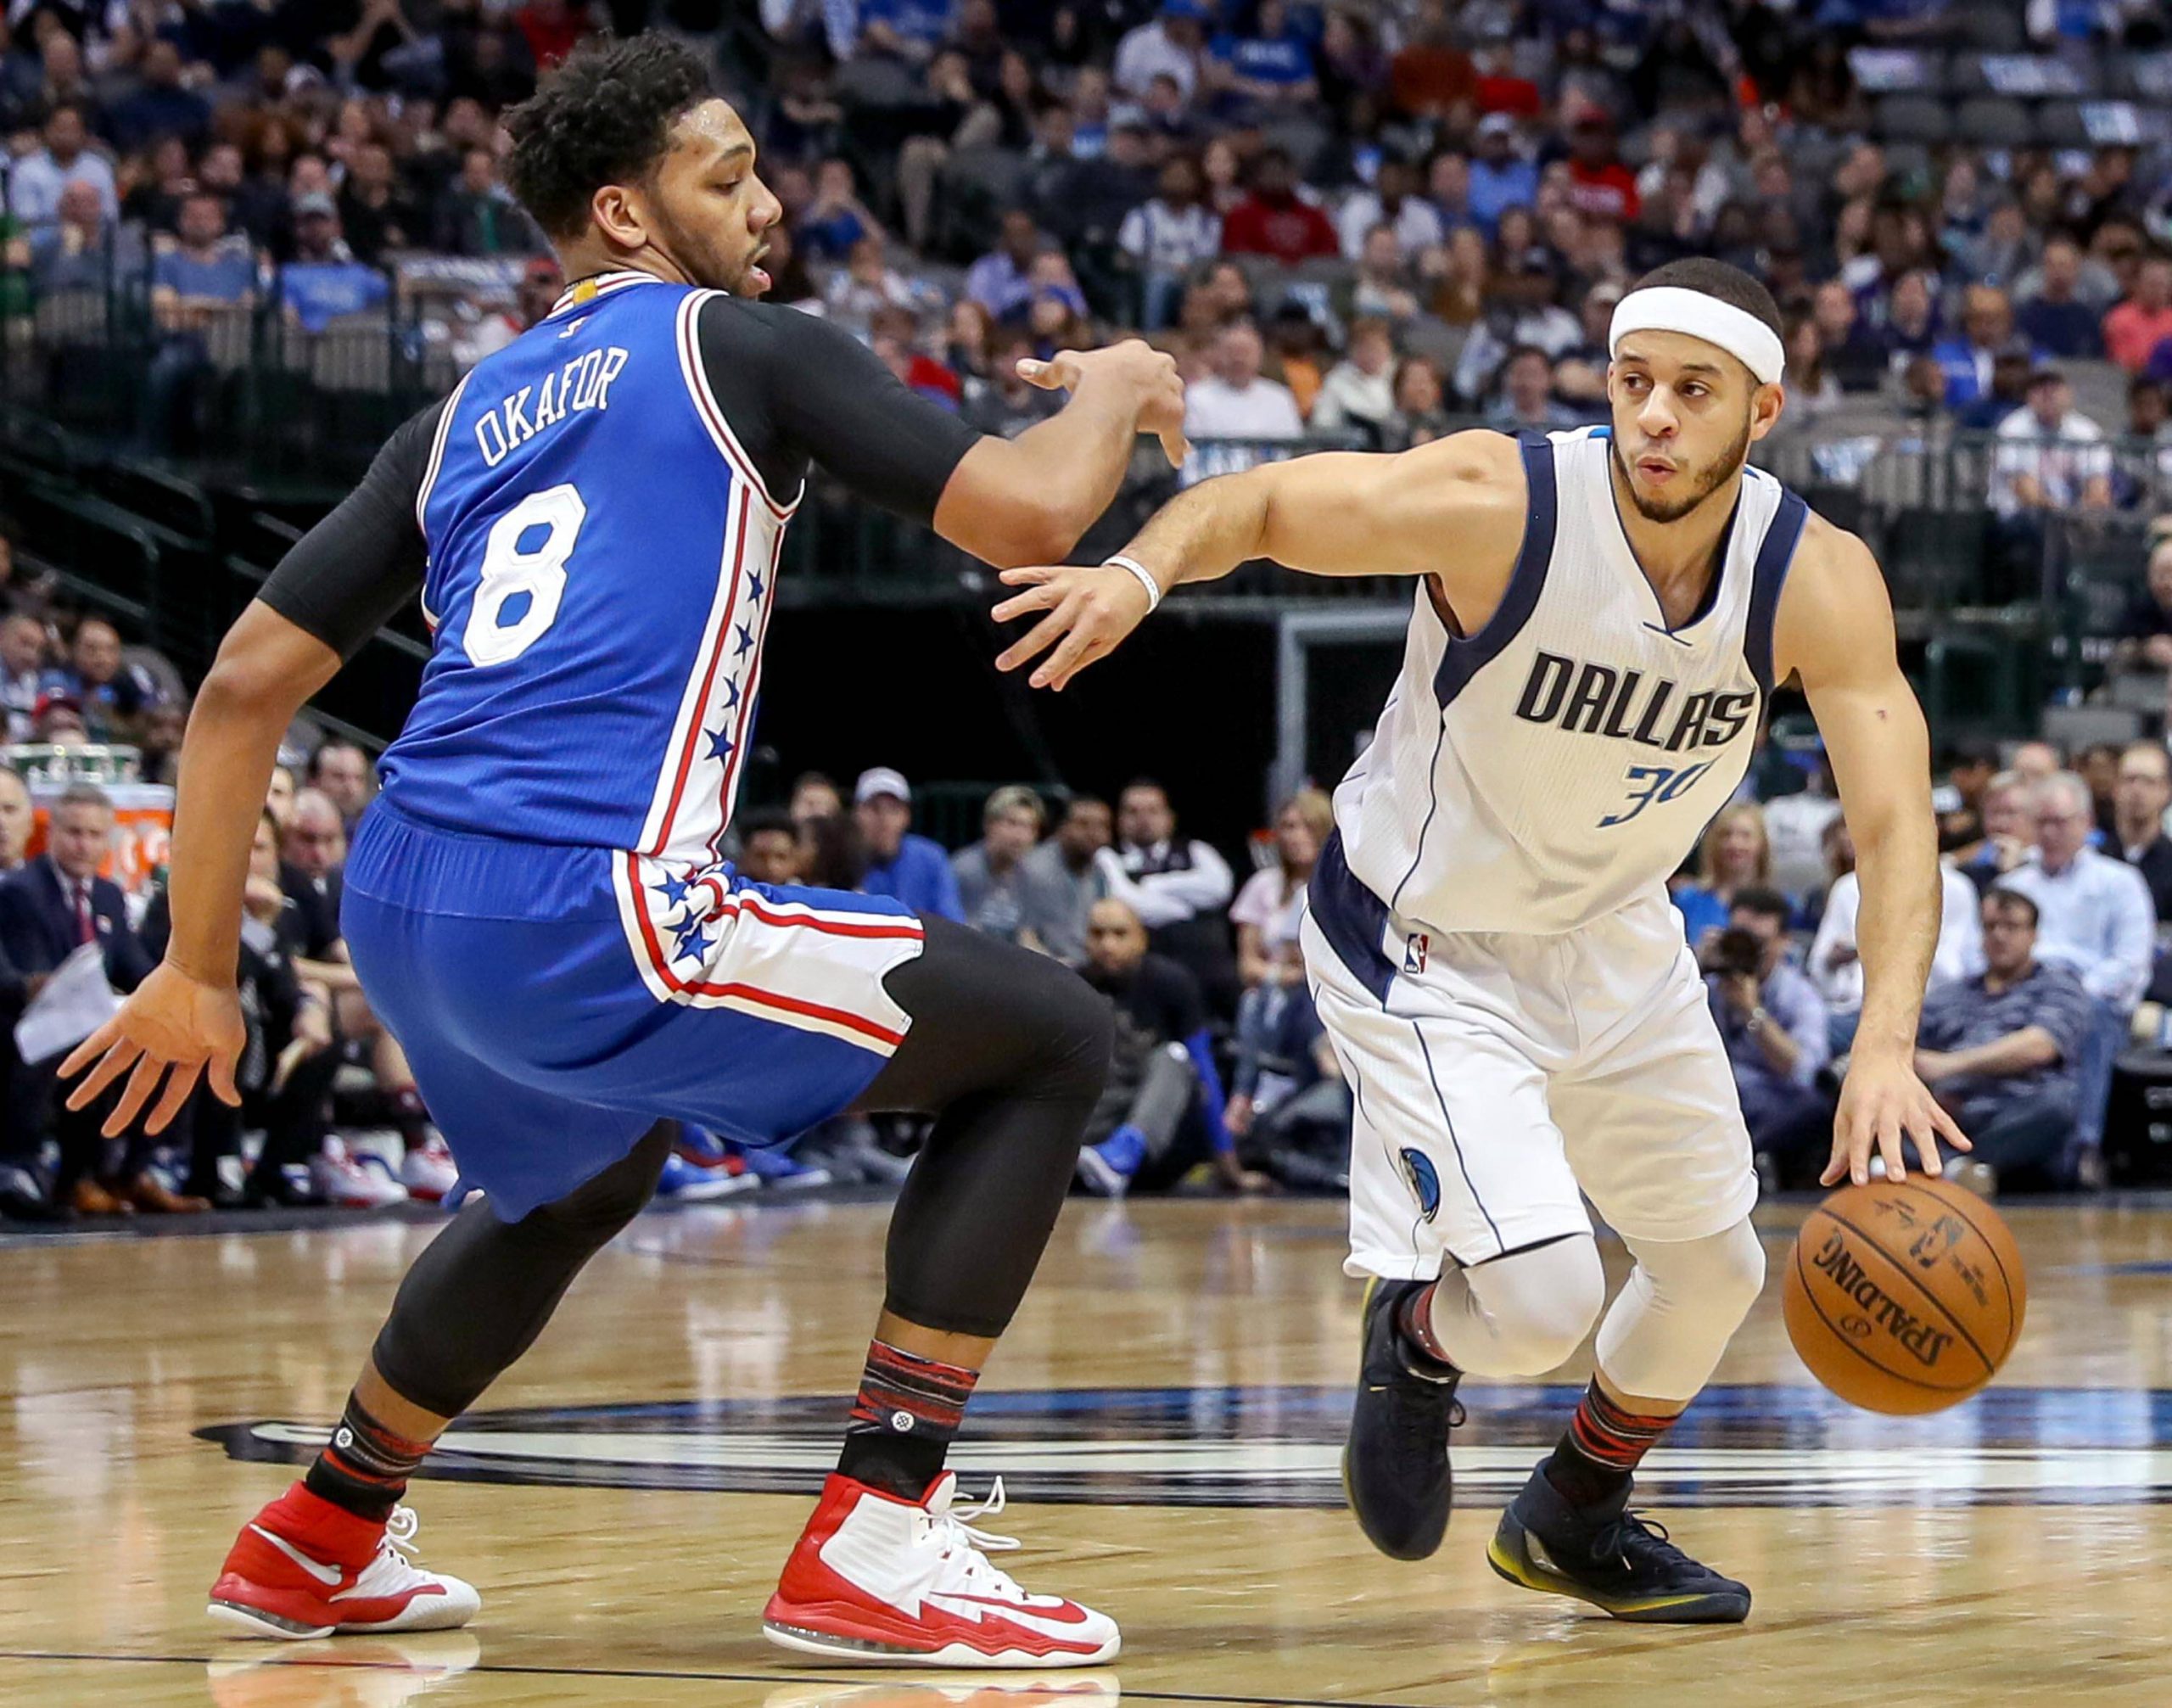 Seth Curry 2021 - Net Worth, Salary, Records, and Endorsements